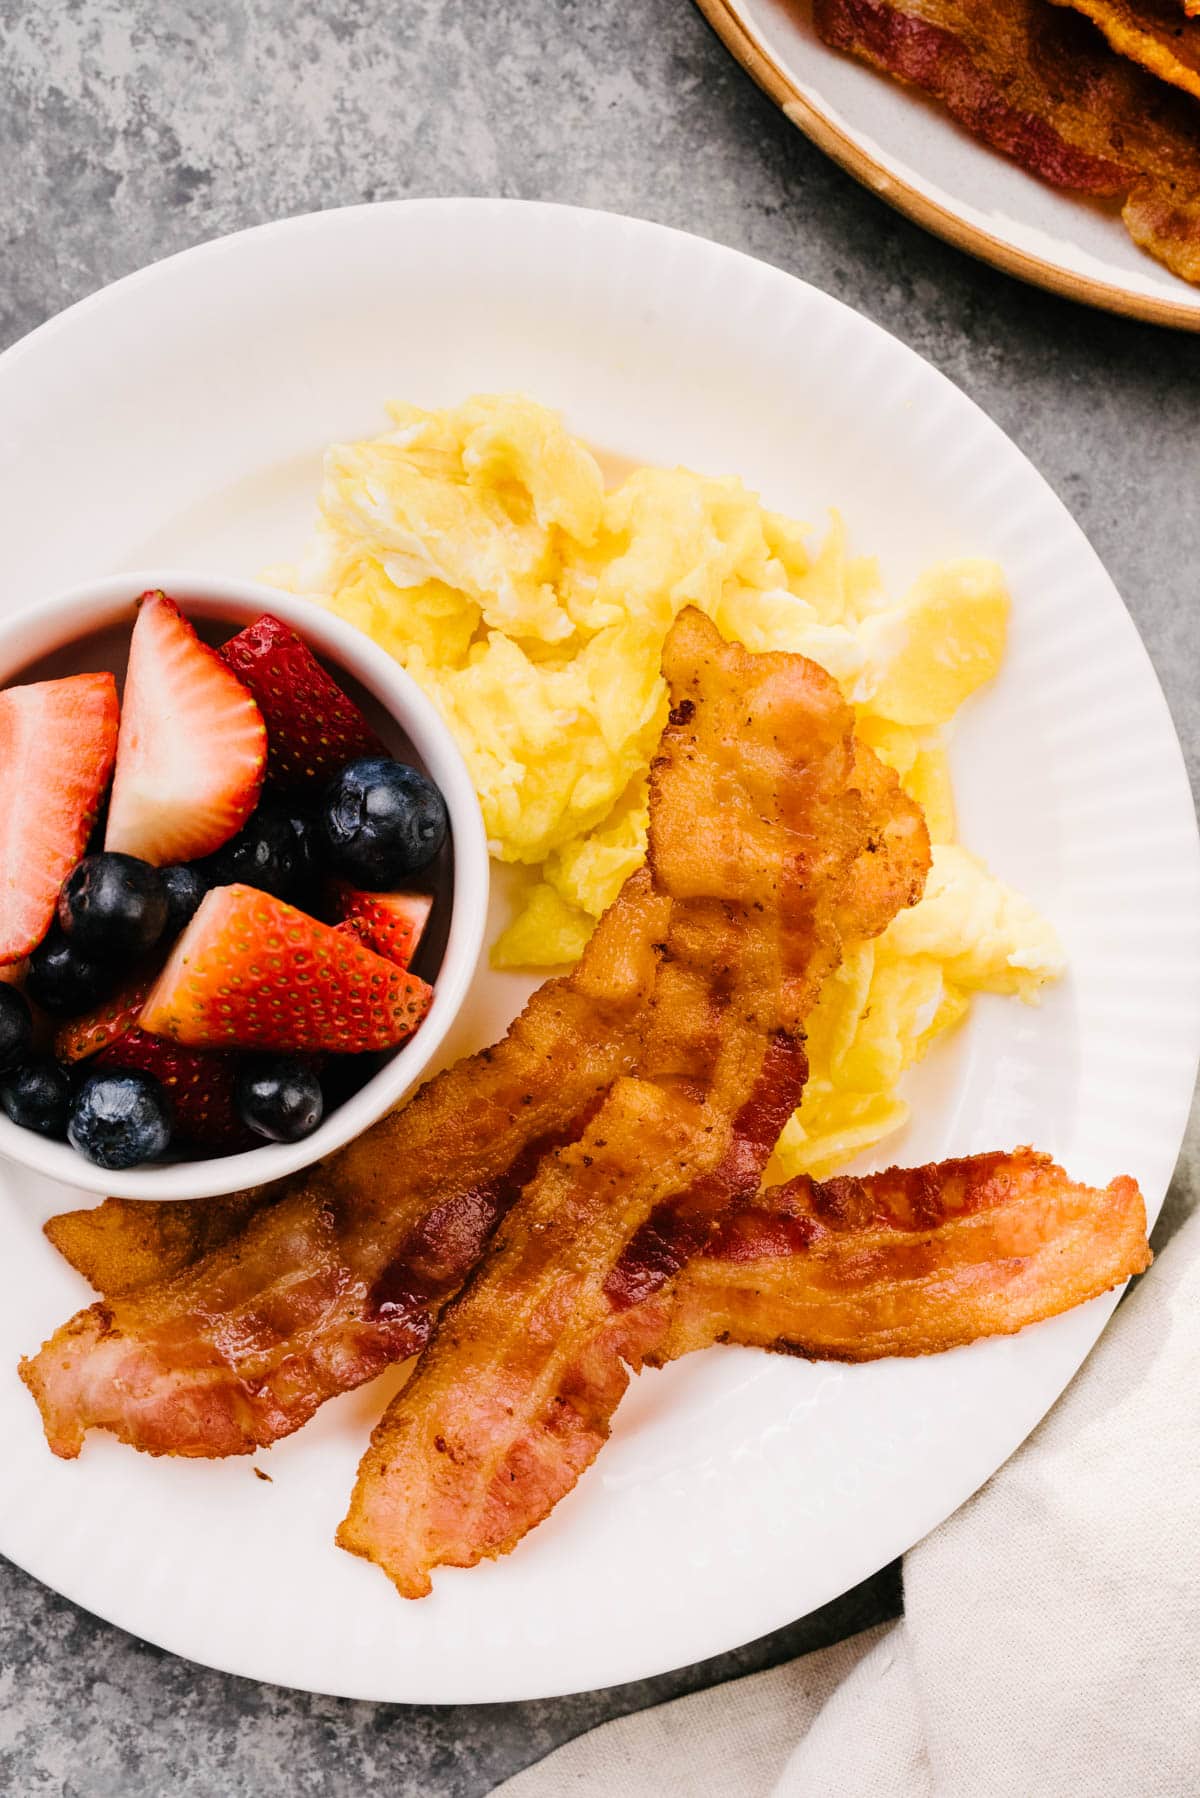 Crispy bacon, scrambled eggs, and a bowl of mixed berries on a white plate with a linen napkin to the side.